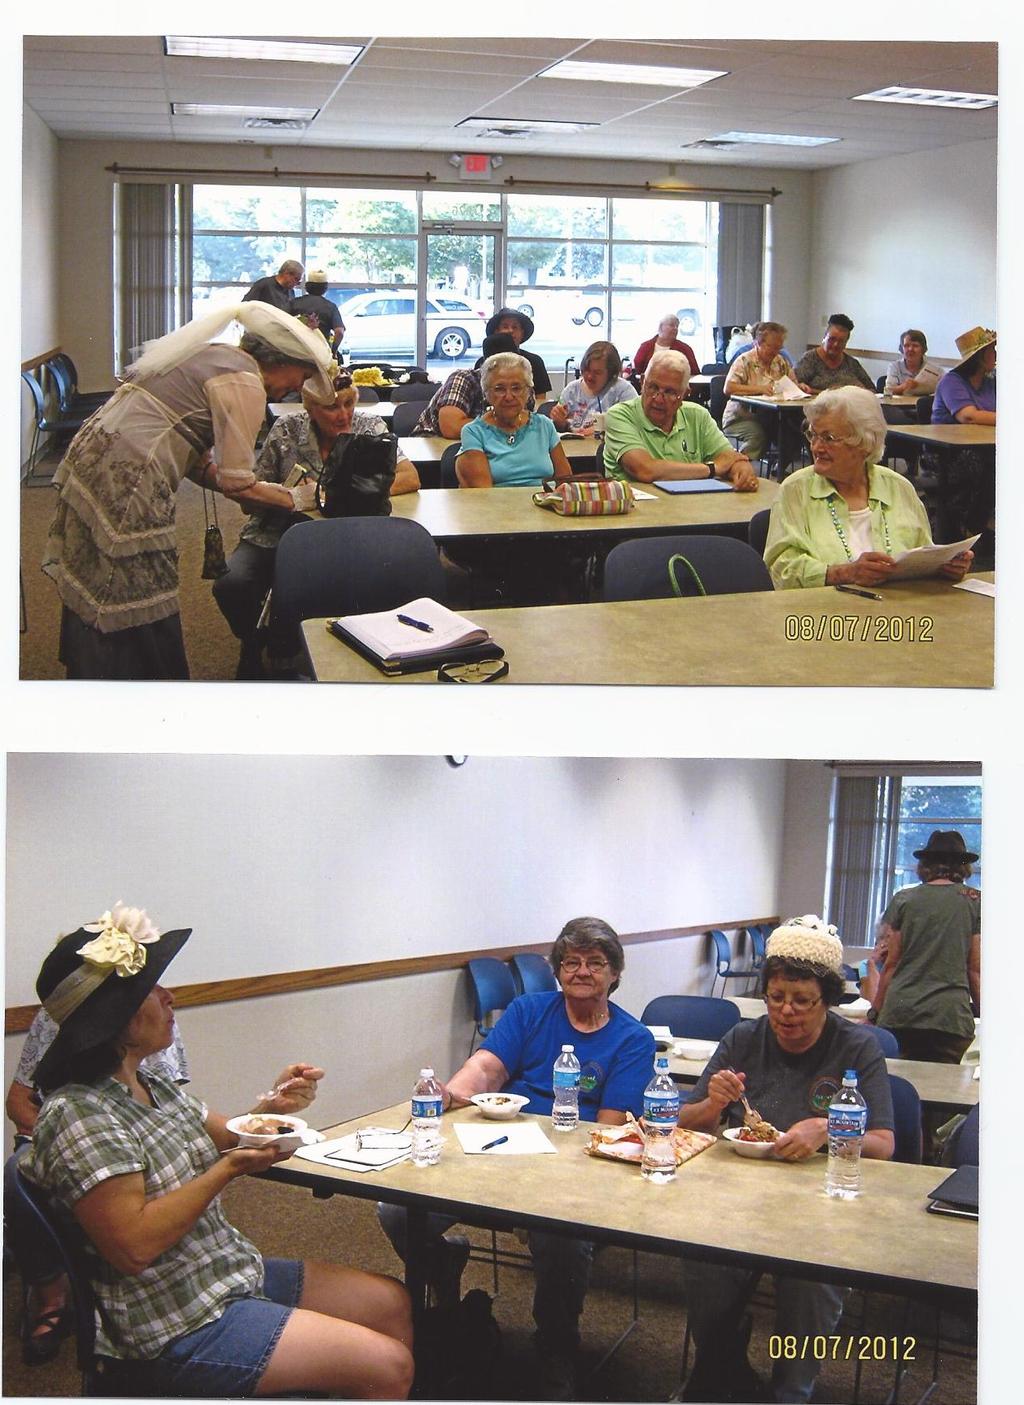 Program Re-Cap The Ice Cream Social in August was well attended. Chris Brookes brought in extra hats for anyone to wear and several of us took advantage.